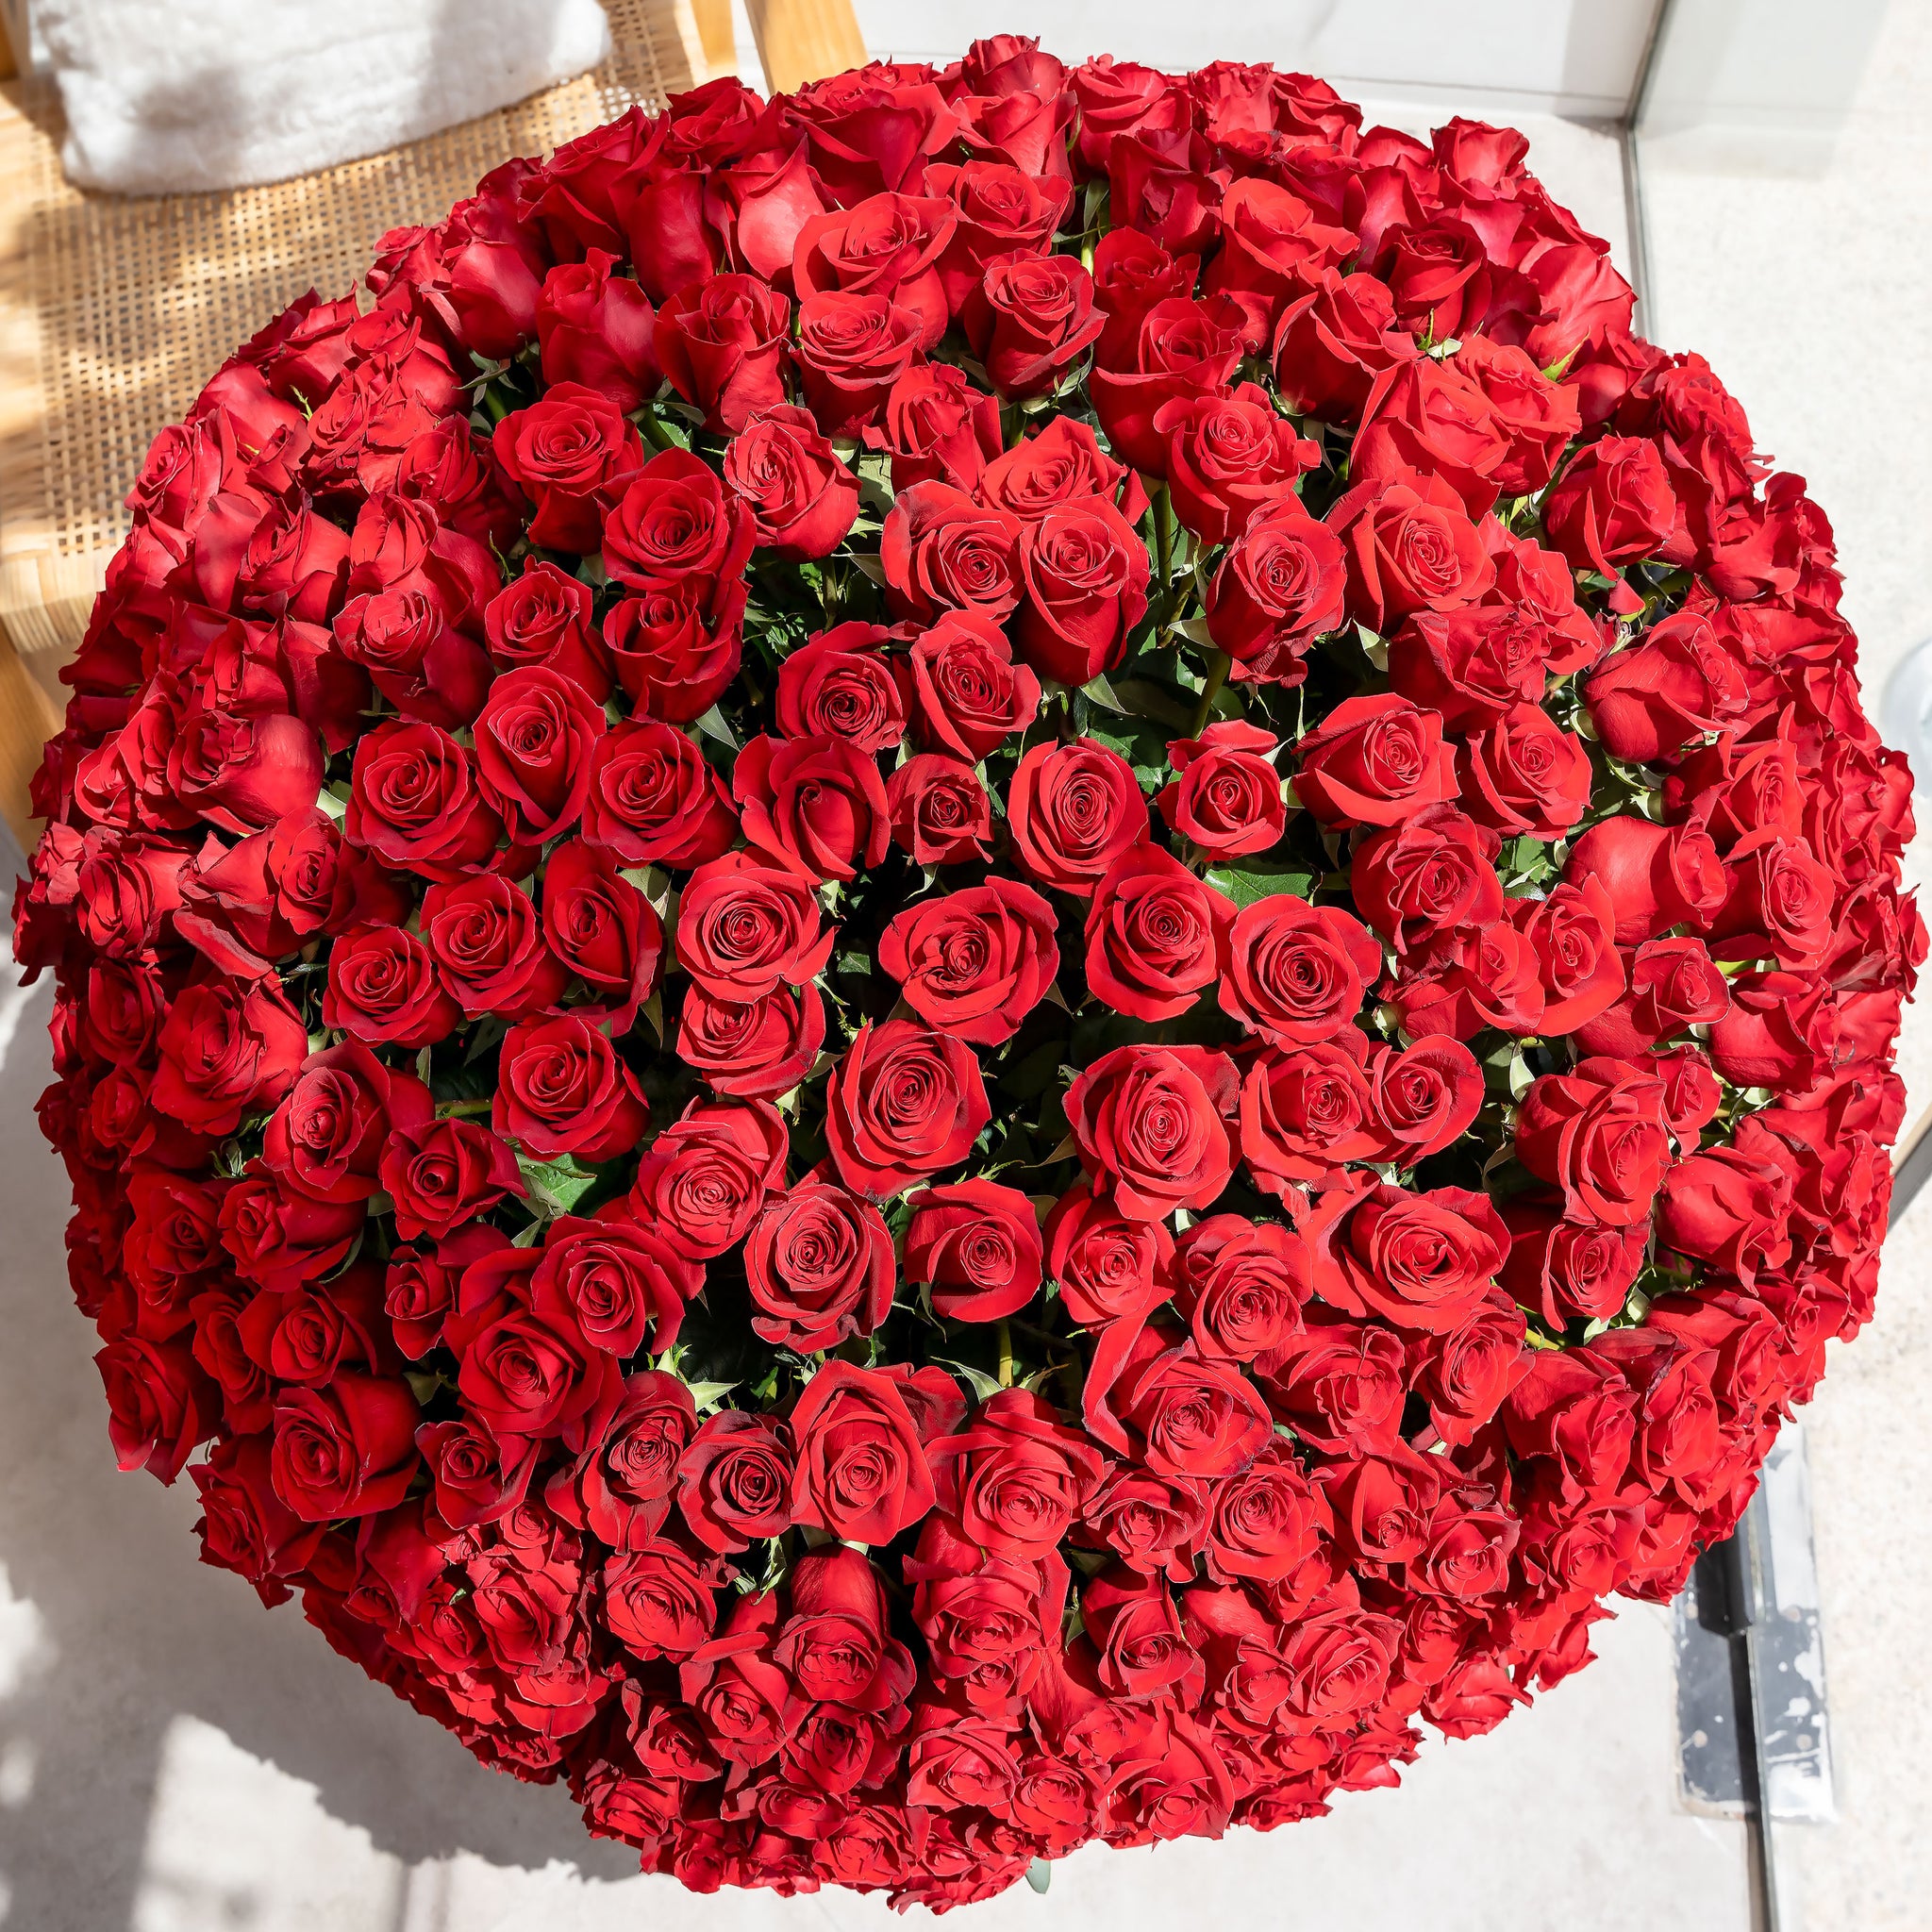 500 Red Roses - XXL | Free Same-Day Delivery to all Emirates - Flowers.ae